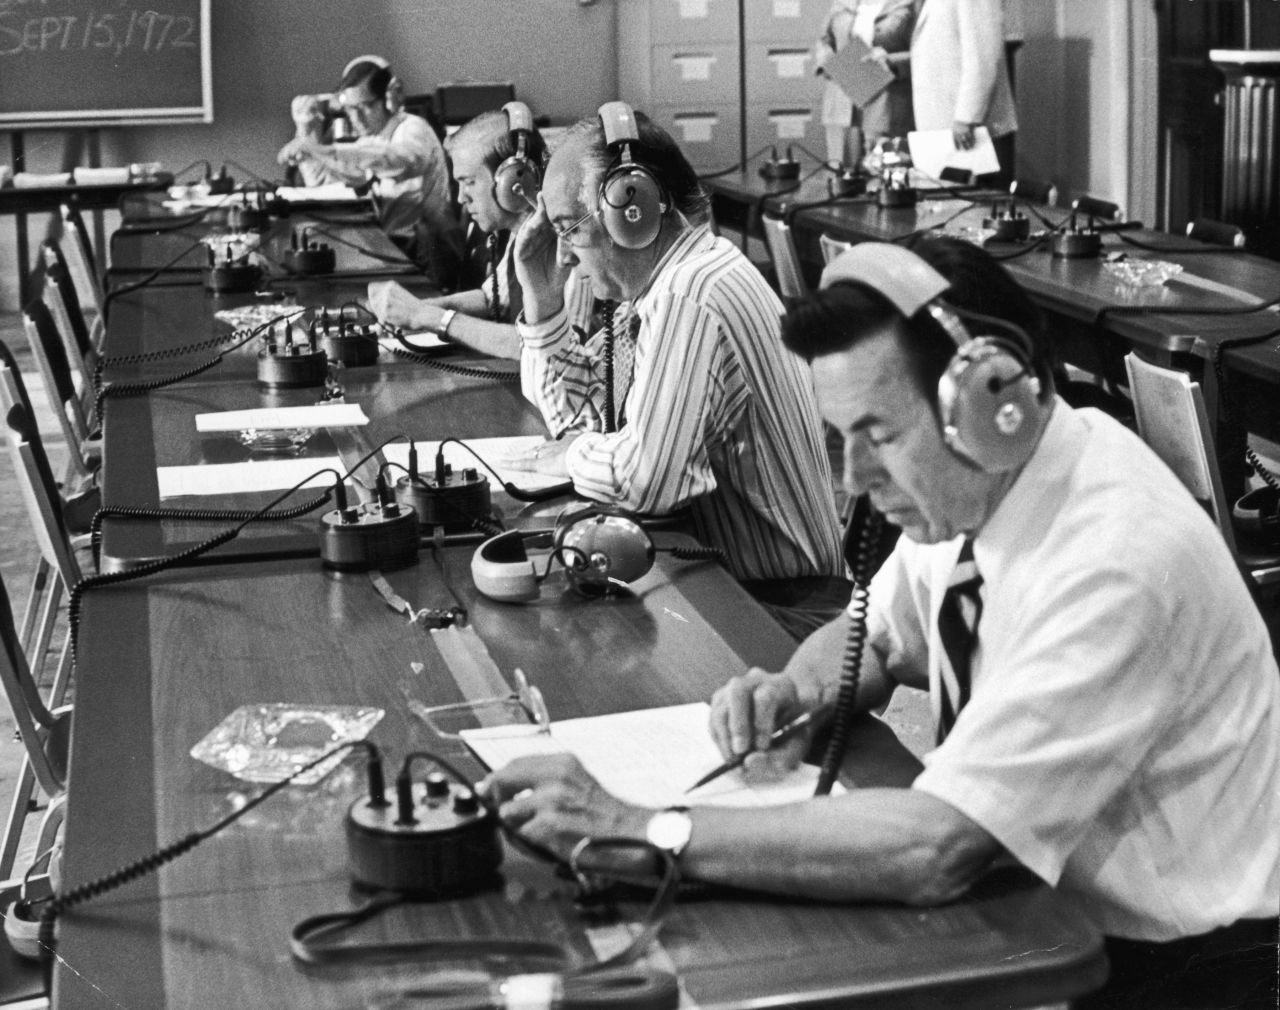 US Reps. Edward Boland, right, and Jack Edwards, second from right, are seen here listening to some of the presidential tapes on August 6, 1974. The tapes revealed a conversation from June 23, 1972, that proved Nixon had knowledge of the cover-up from the beginning.